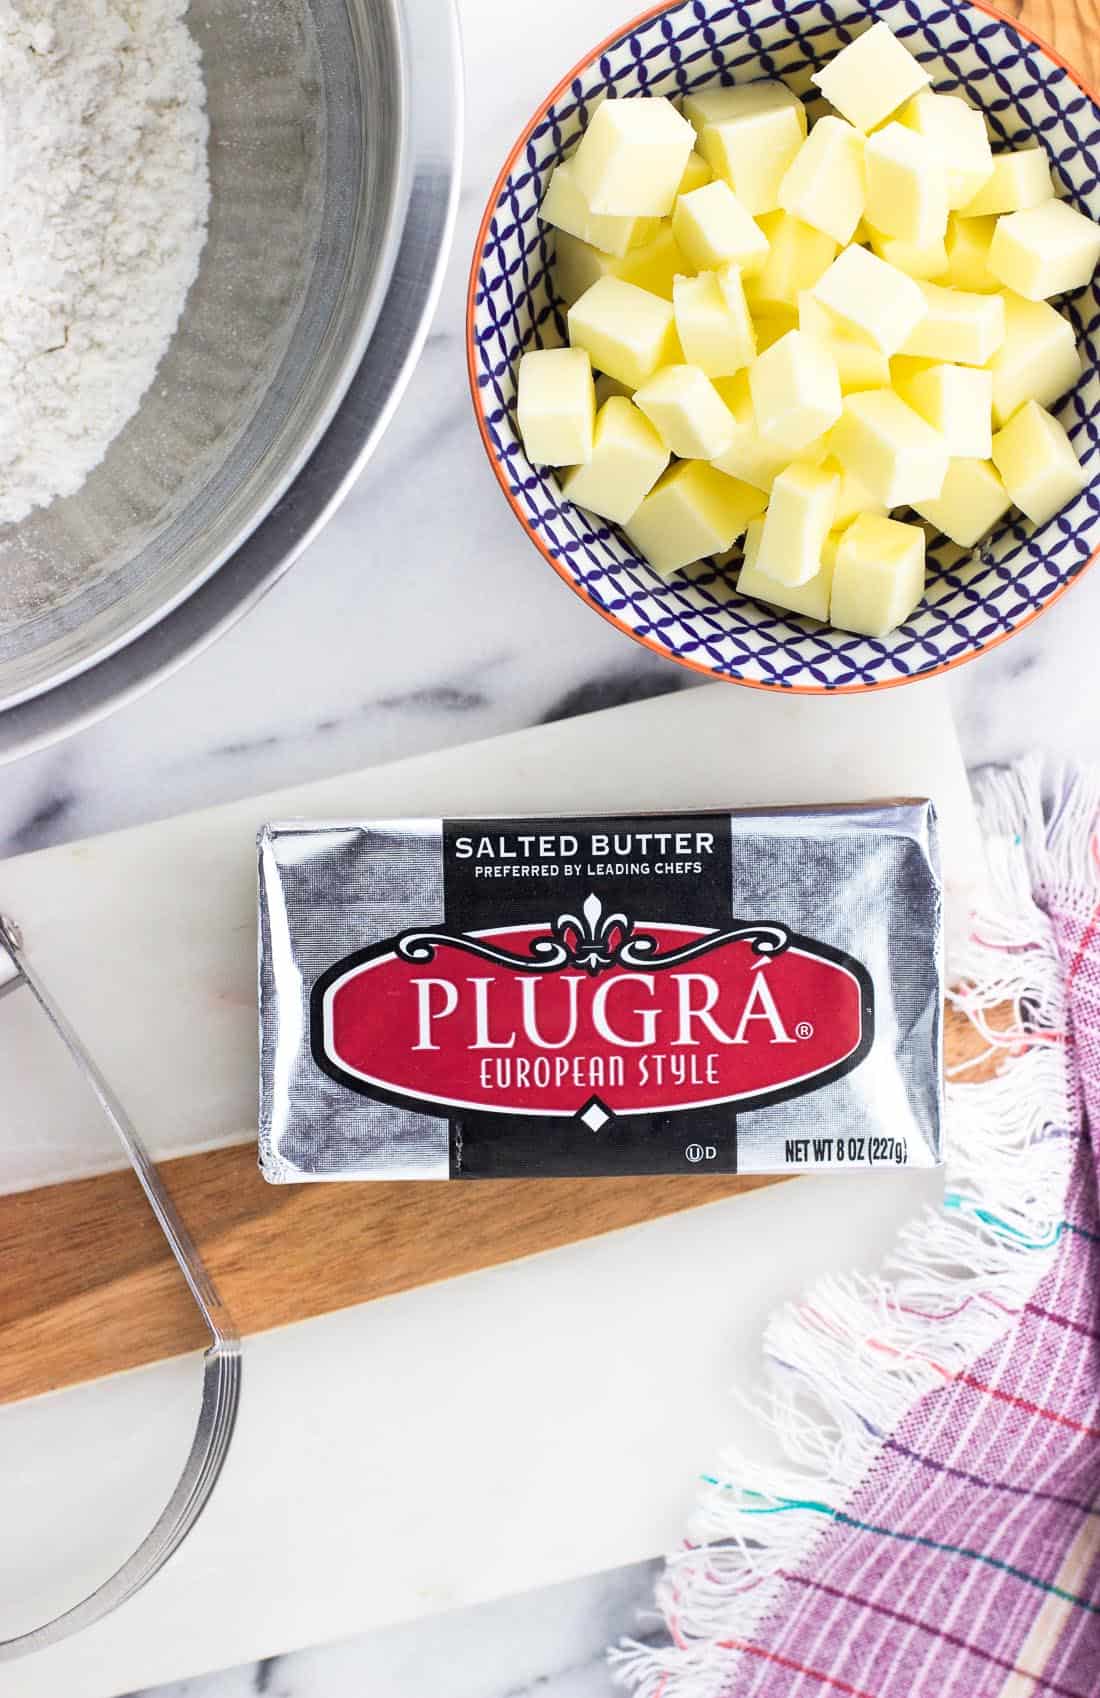 A package of Plugra butter on a marble board surrounded by a bowl of flour, a pastry blender, and a bowl of diced butter